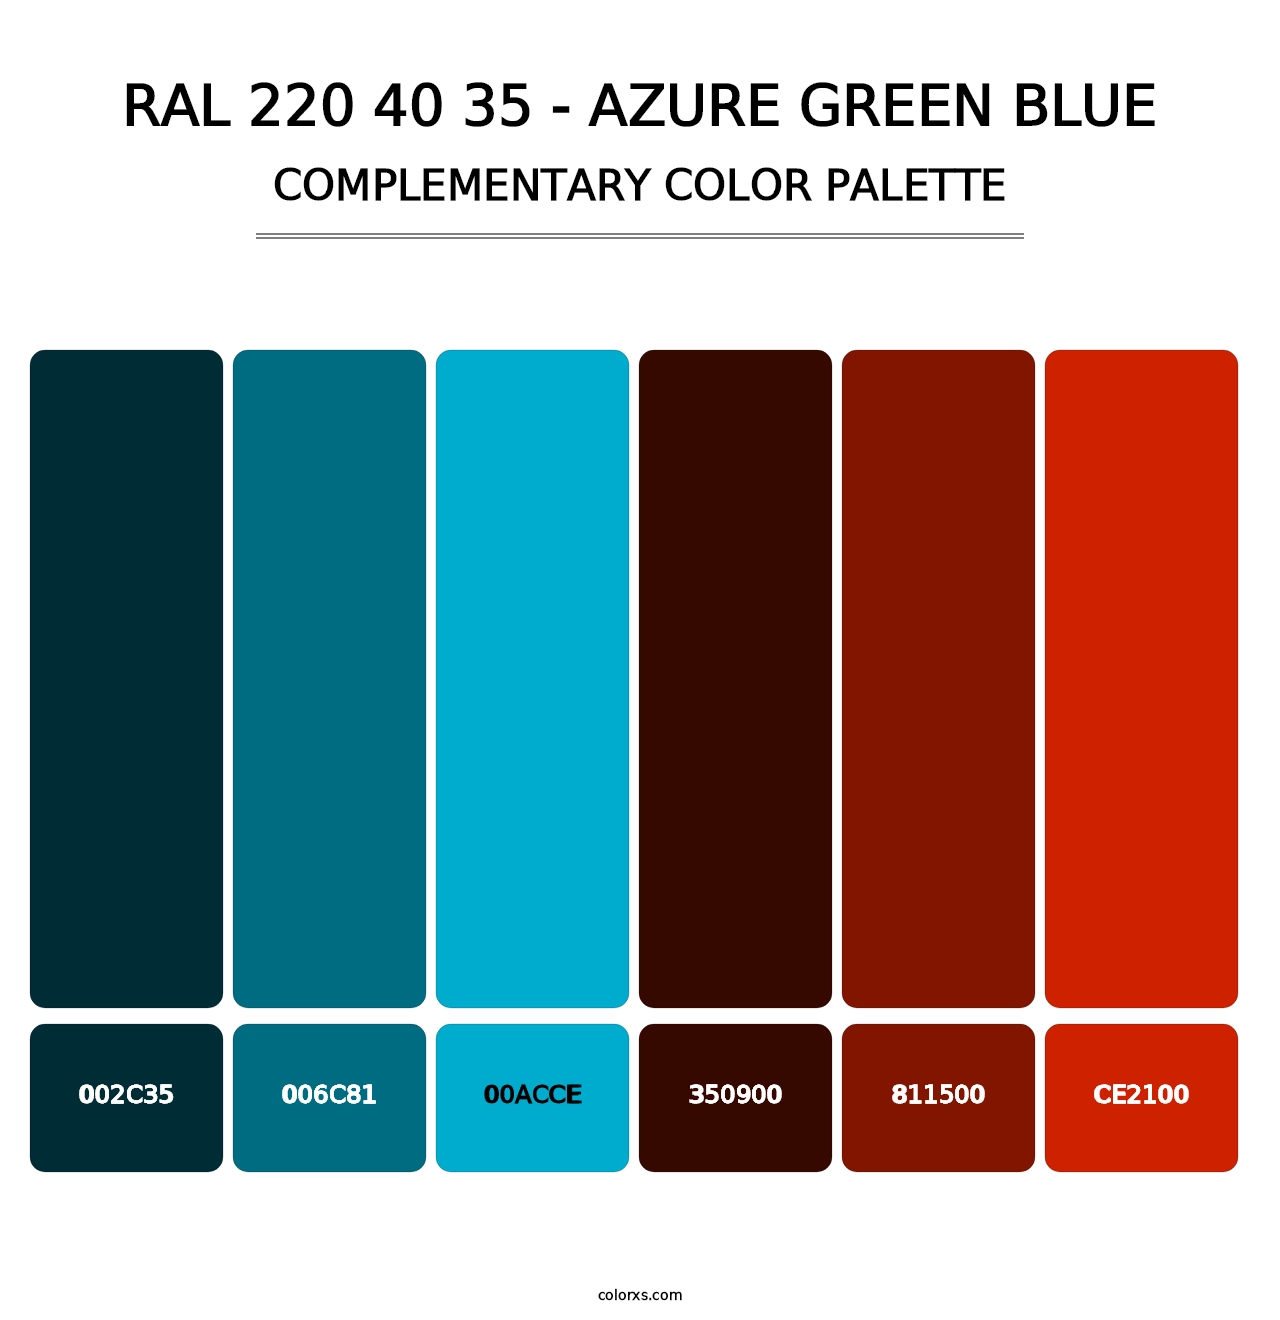 RAL 220 40 35 - Azure Green Blue - Complementary Color Palette